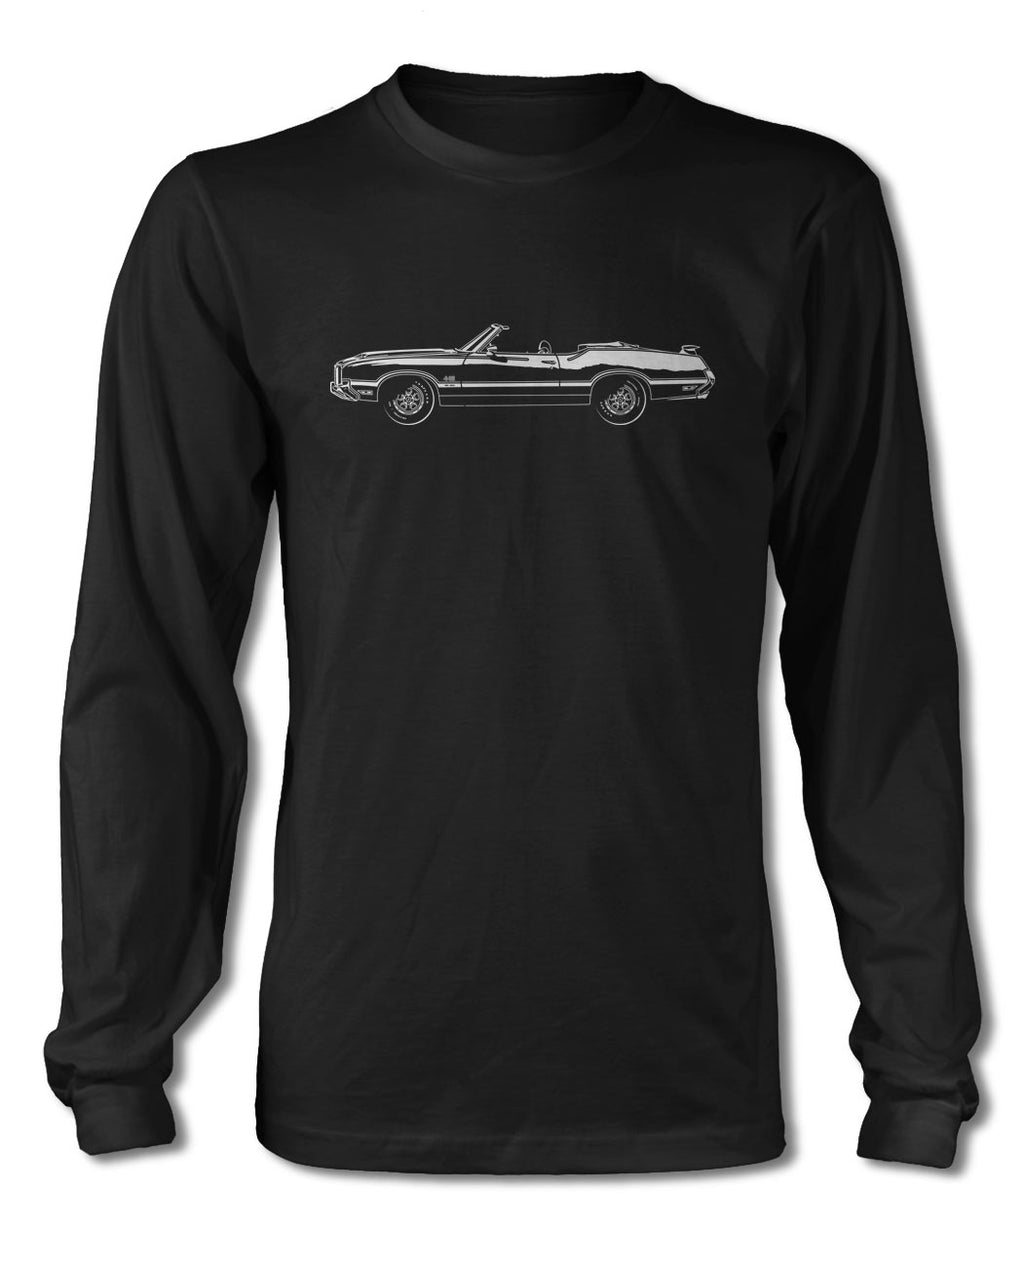 1972 Oldsmobile Cutlass 4-4-2 W-30 Convertible with Spoiler T-Shirt - Long Sleeves - Side View